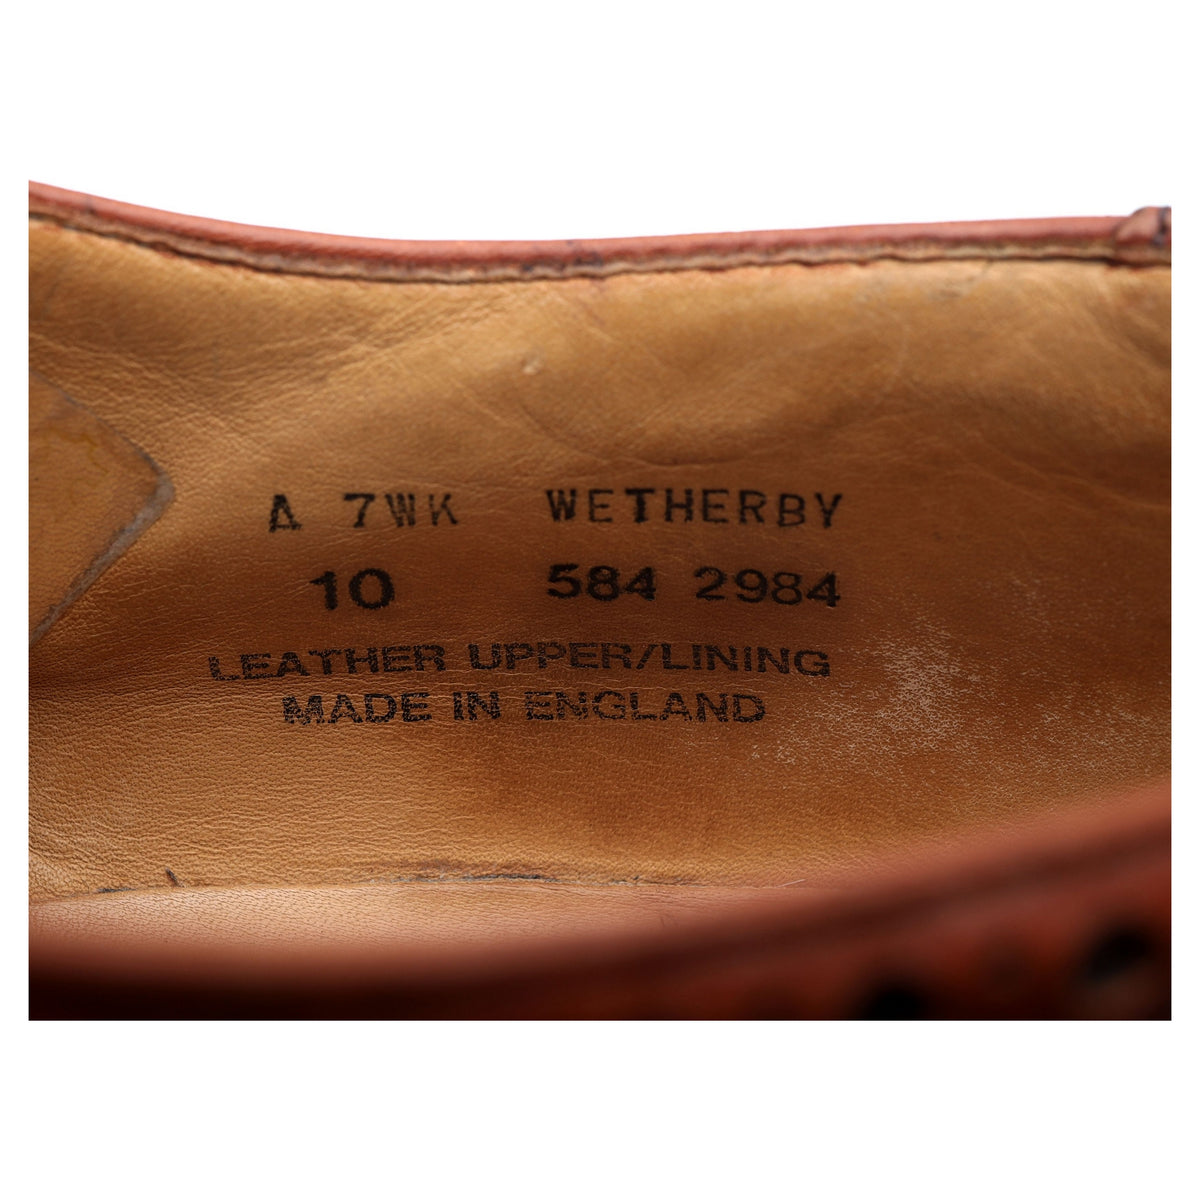 &#39;Wetherby&#39; Tan Brown Leather Derby Brogues UK 10 F